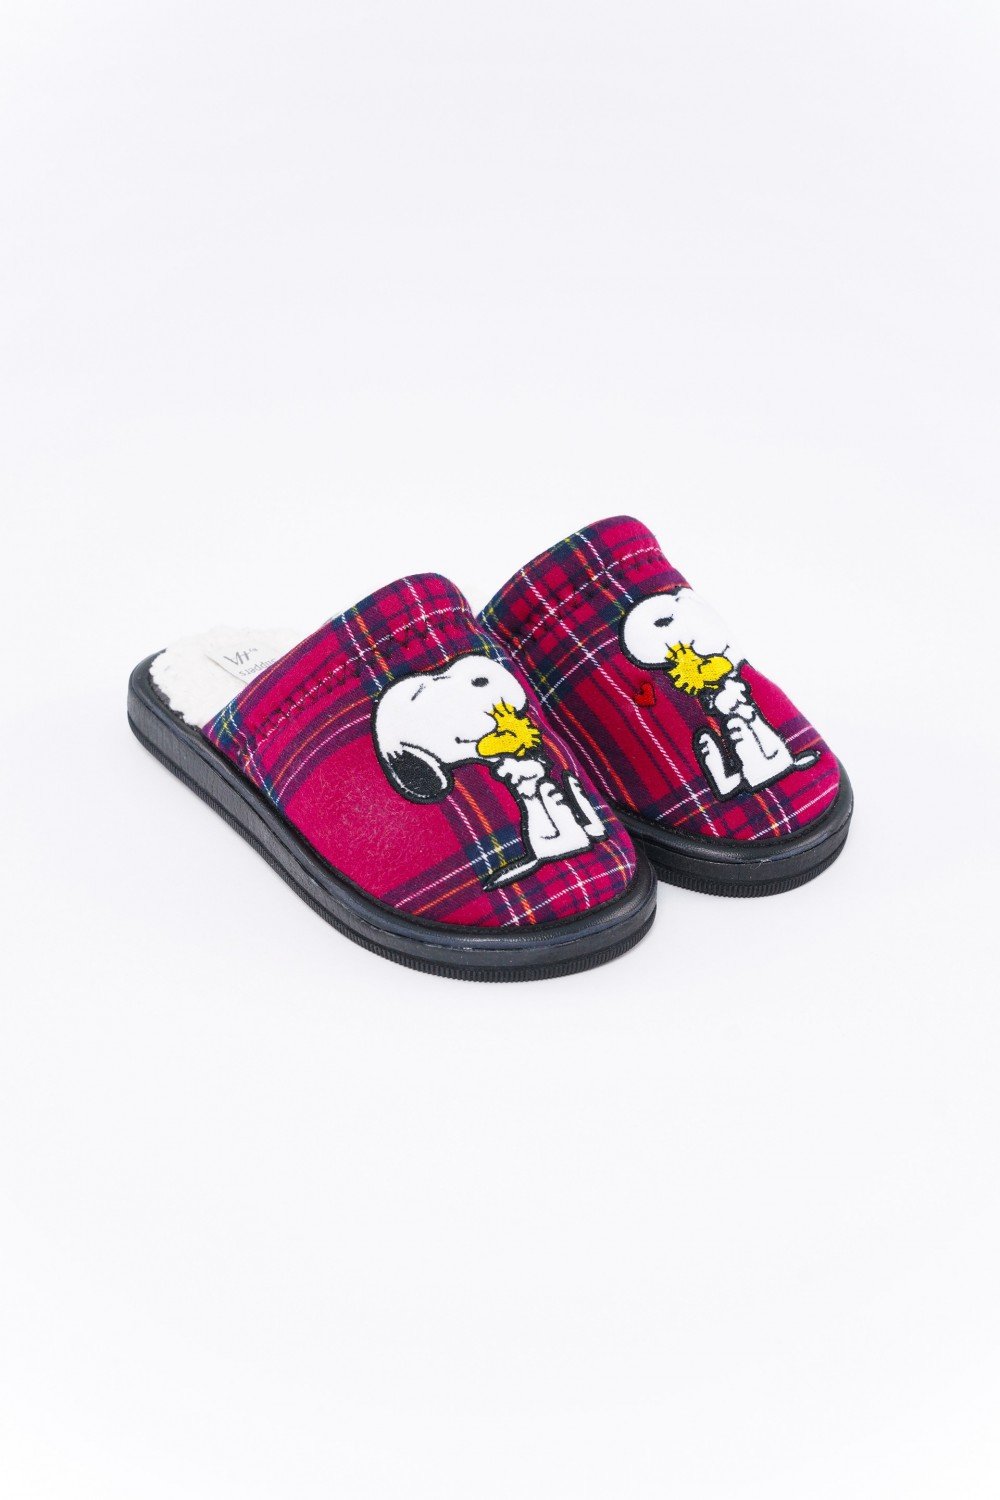 Slippers fillette SNOOPY